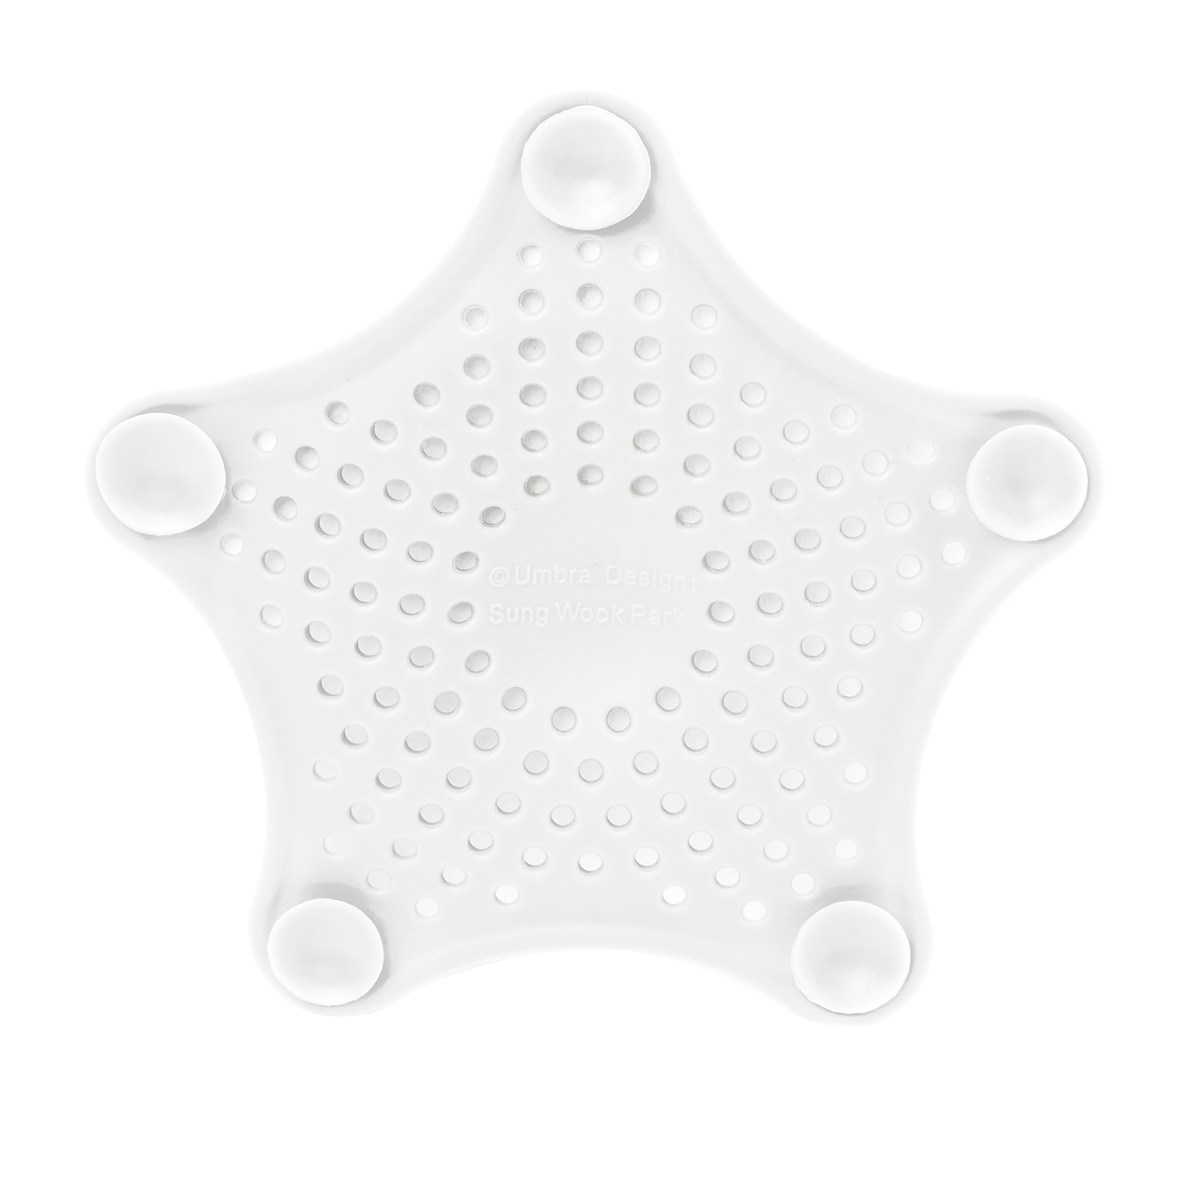 Umbra Starfish Drain Cover | The Container Store